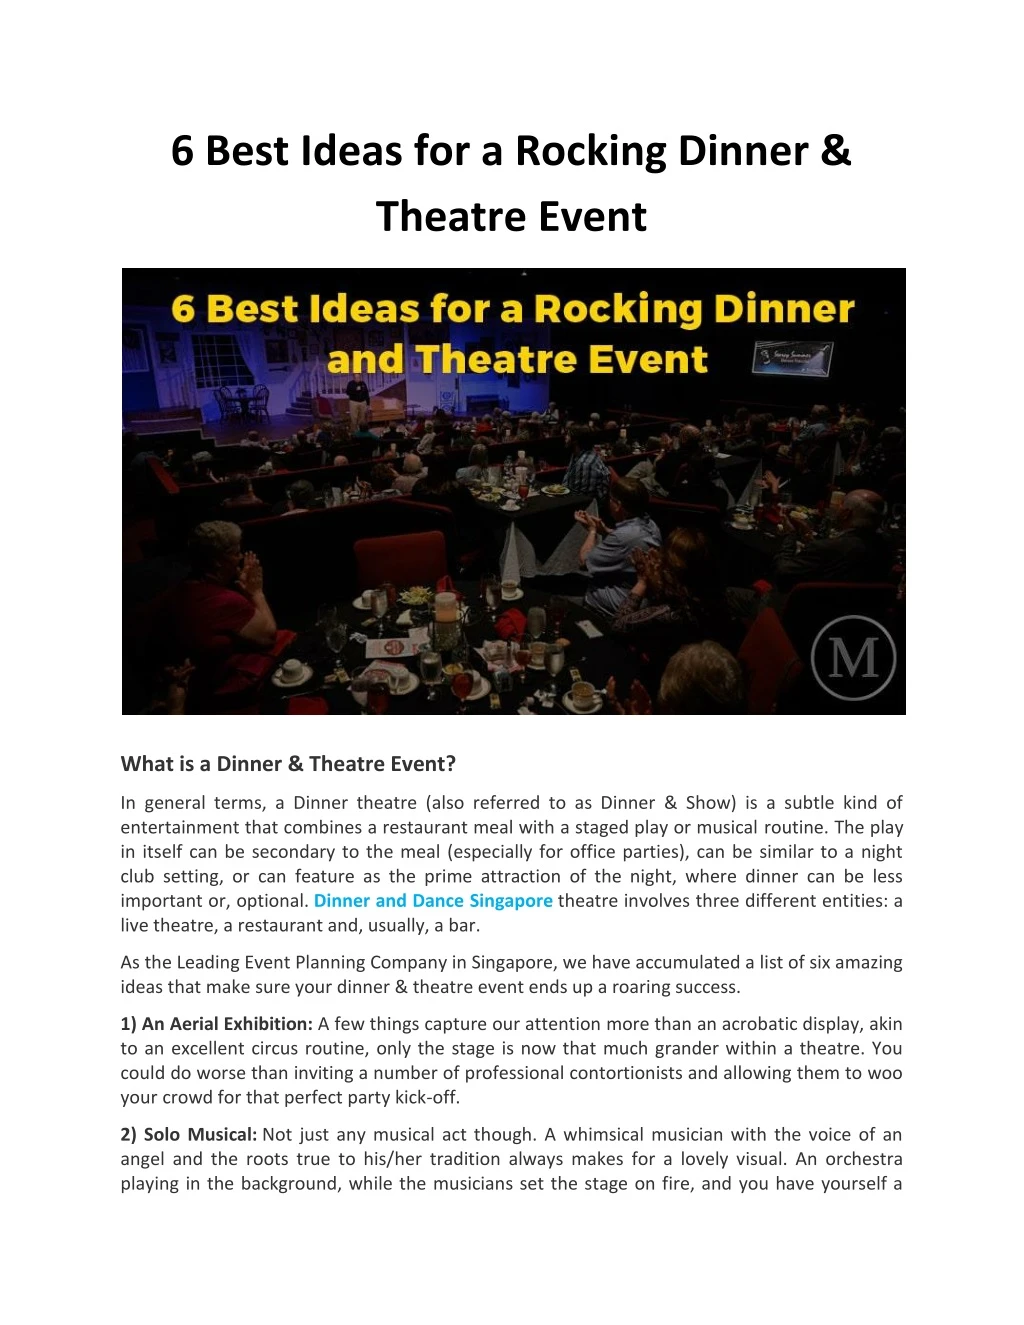 6 best ideas for a rocking dinner theatre event